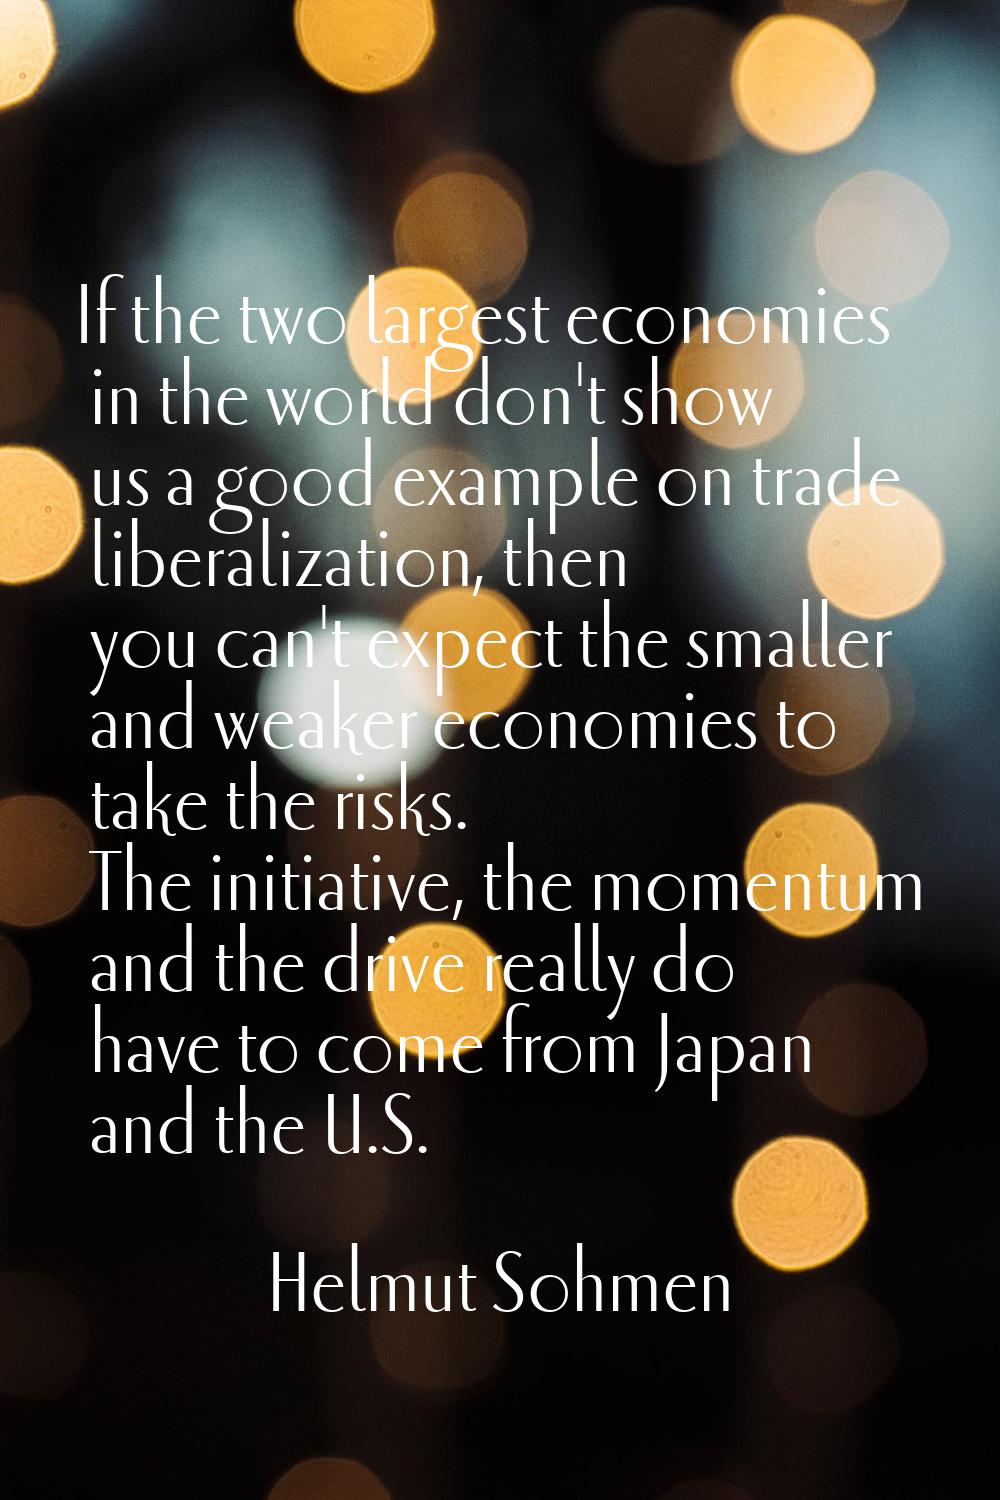 If the two largest economies in the world don't show us a good example on trade liberalization, the